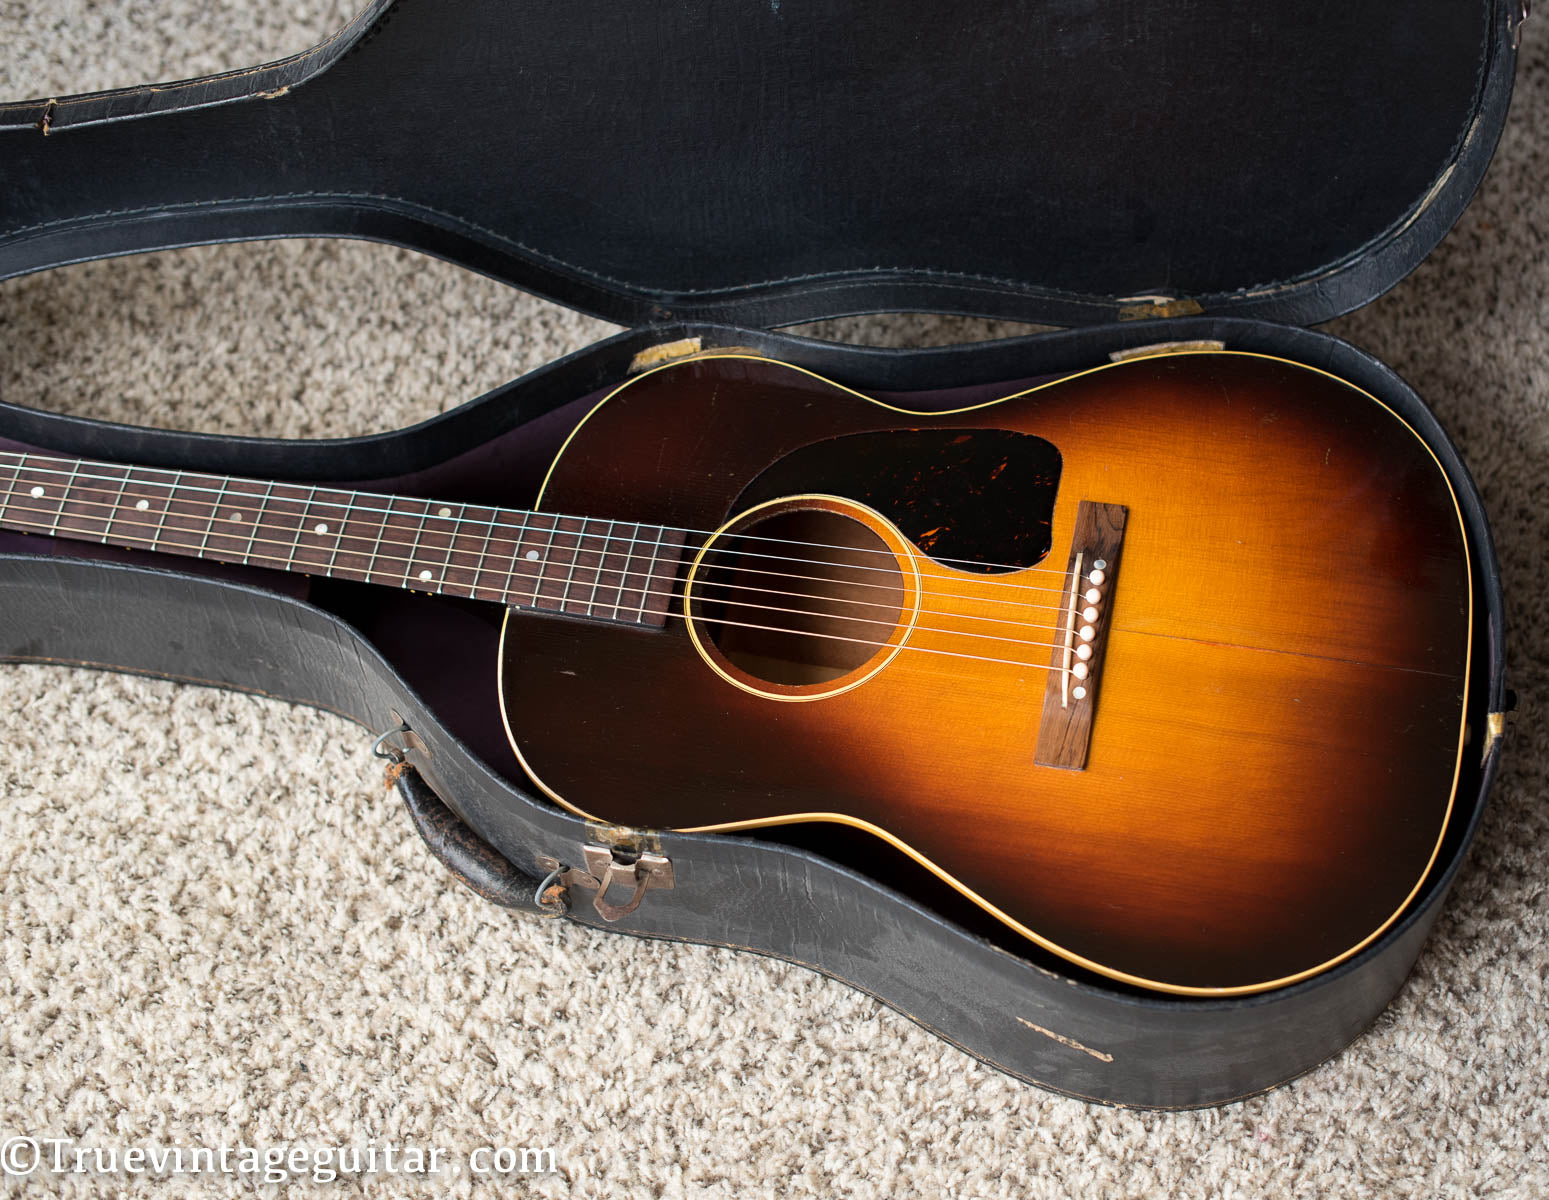 Gibson small body acoustic guitar 1946 LG-2